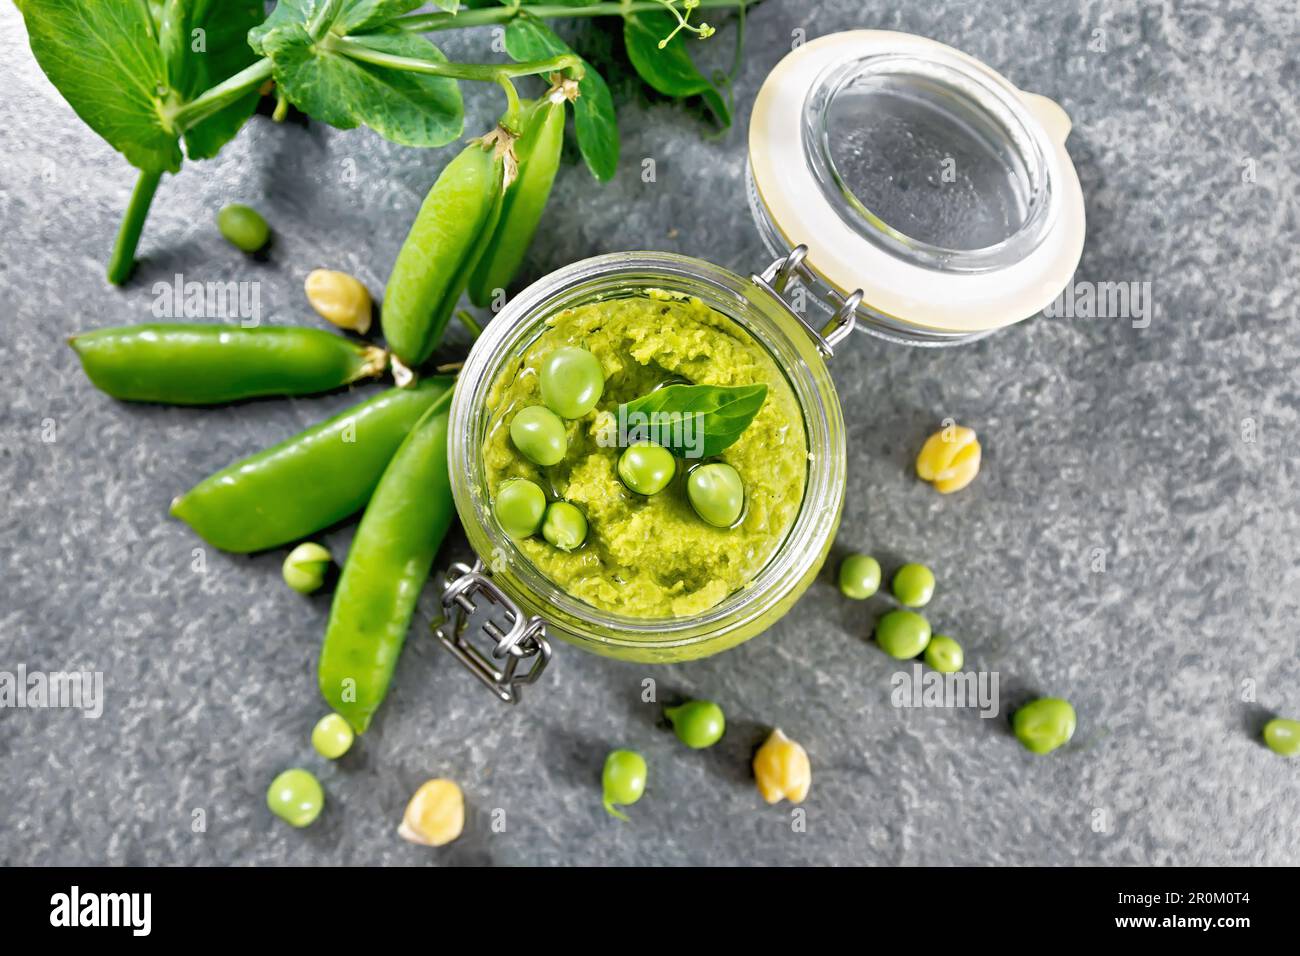 Hummus from green peas and chickpeas in a glass jar, pea pods on top of granite countertop background Stock Photo